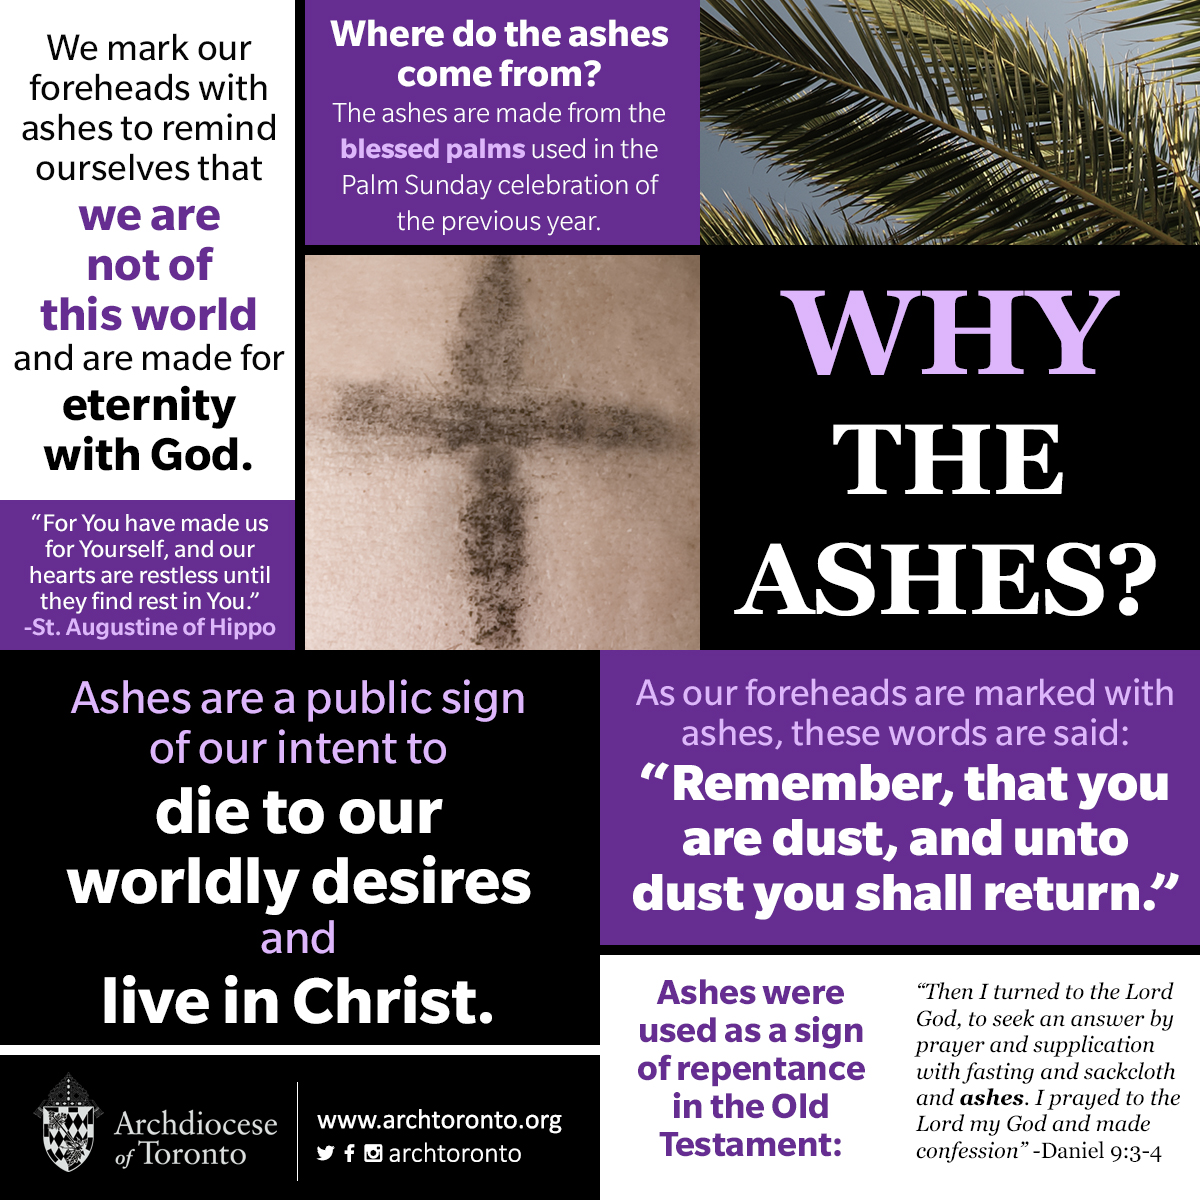 why-the-ashes.jpg